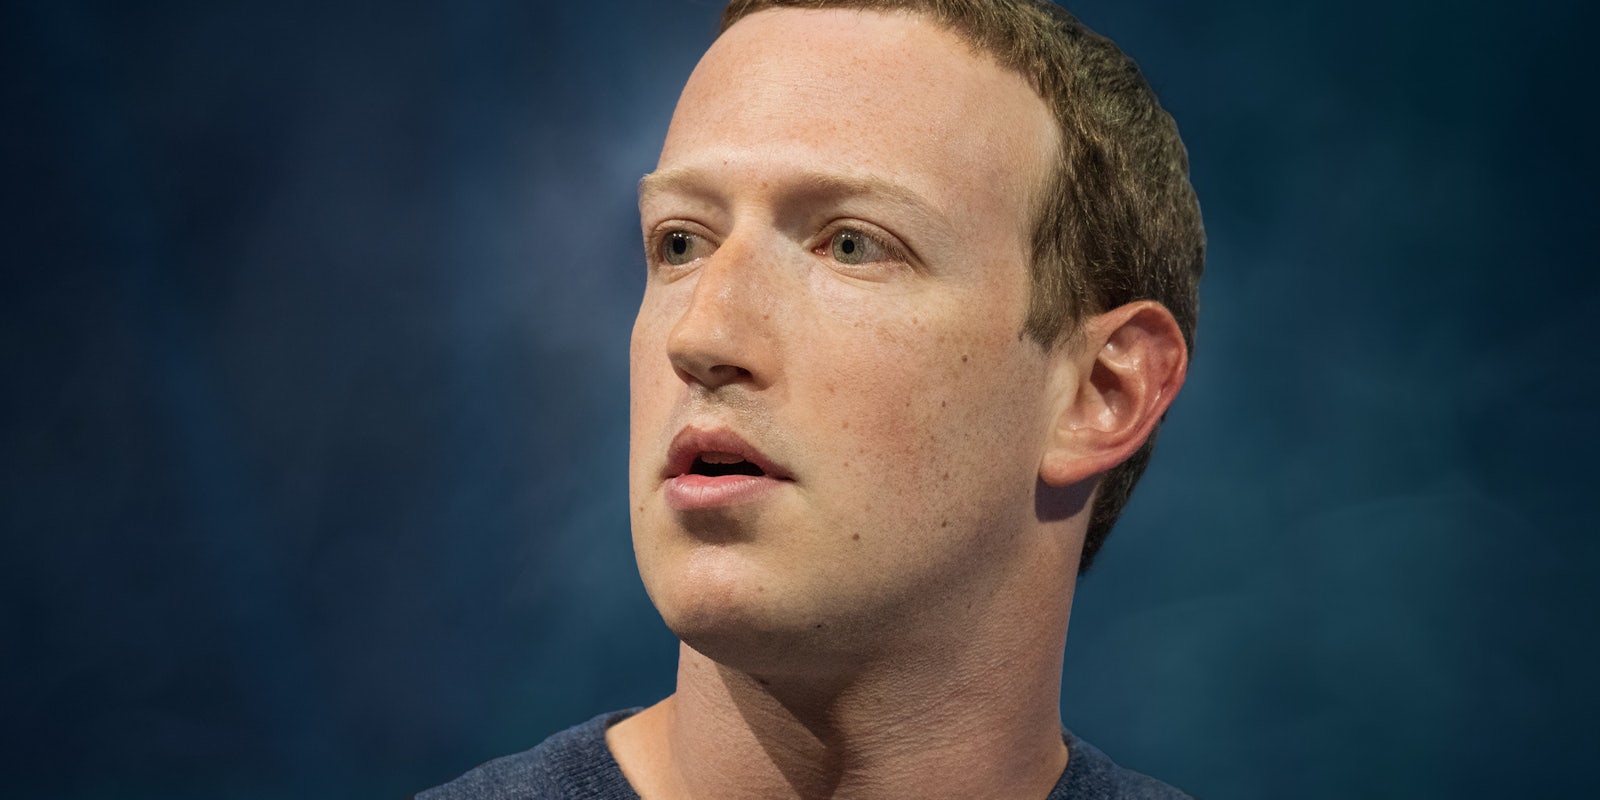 Meta warns investors that Mark Zuckerberg's 'high-risk activities' could lead to his death